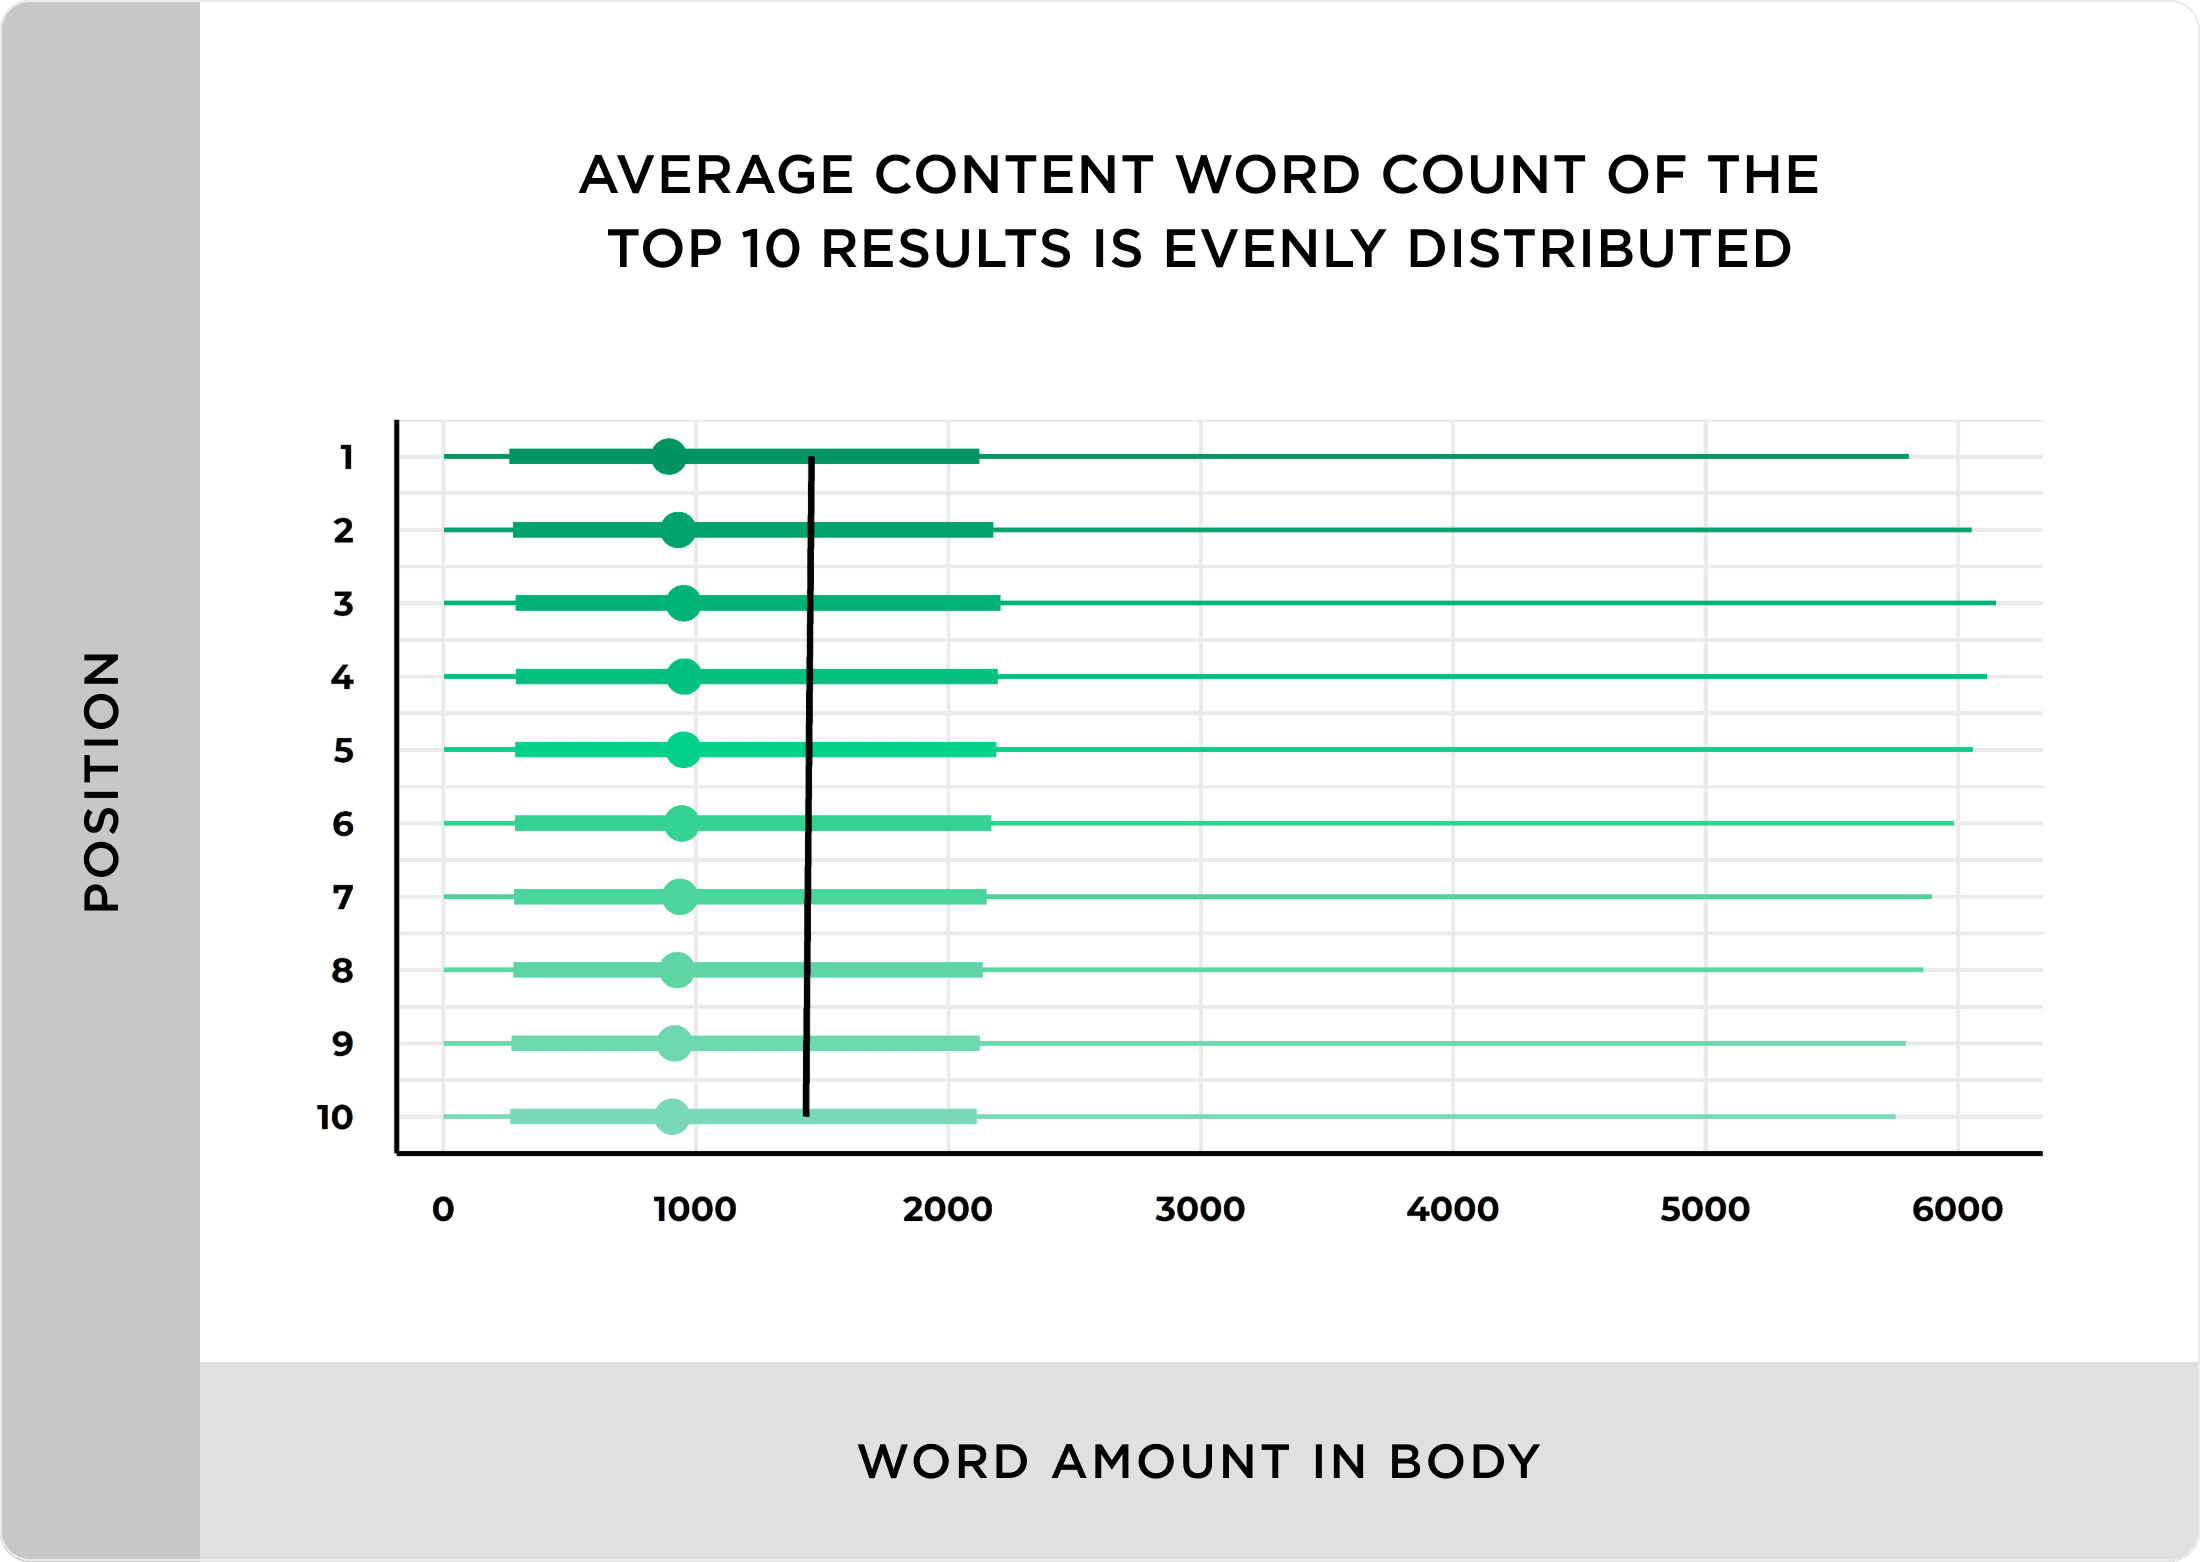 Average content word count of the top 10 results is evenly distributed